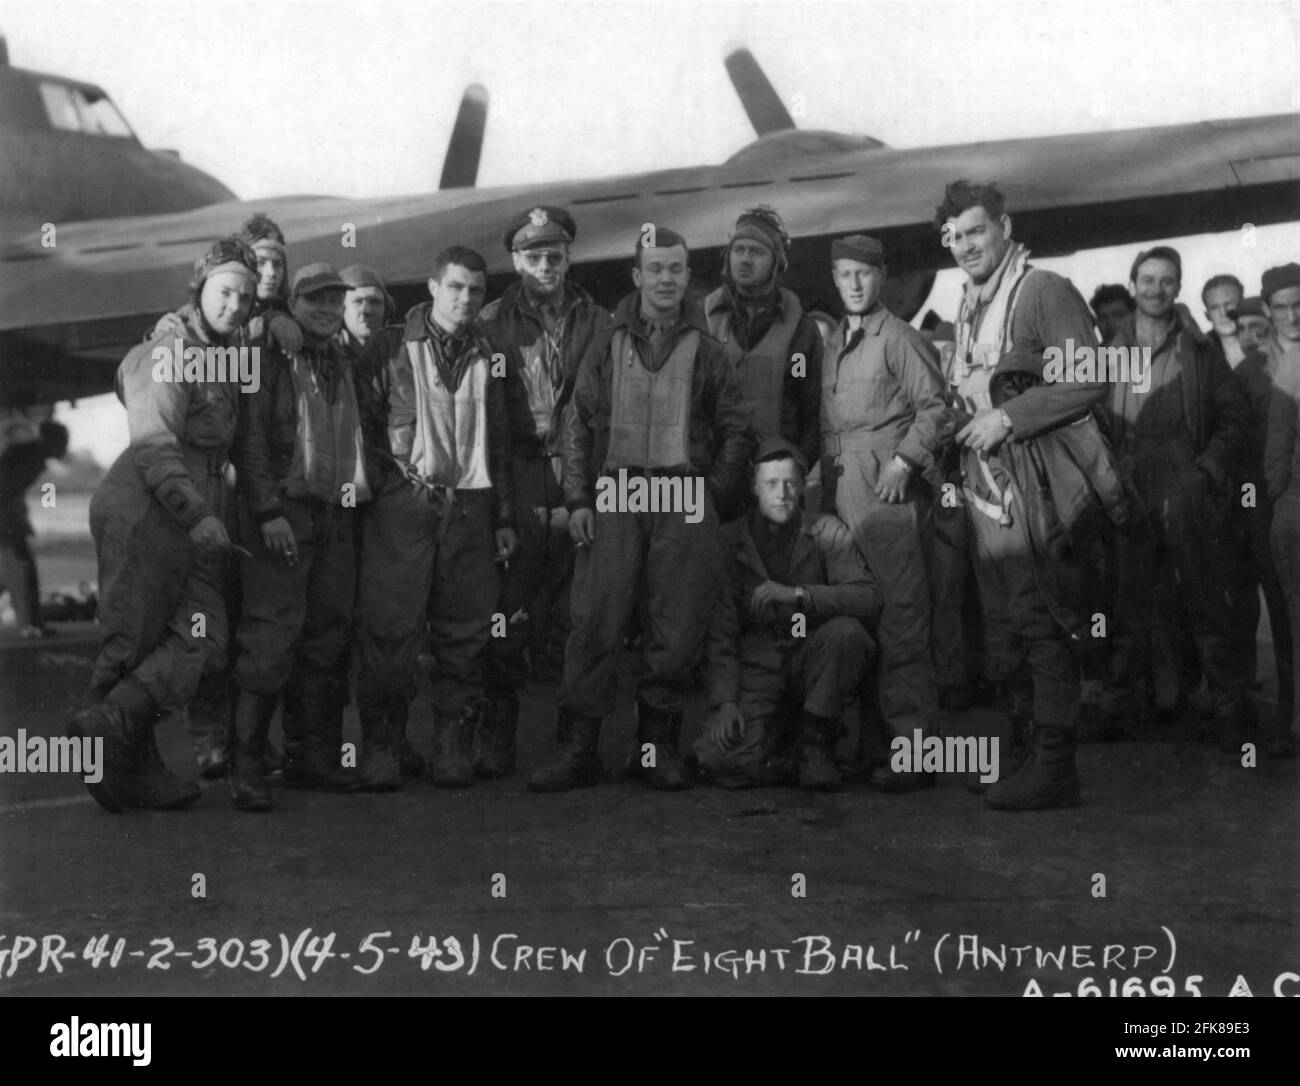 CAPTAIN CLARK GABLE on his 1st mission with the Crew of the B-17F Flying Fortress bomber 8 Ball MK2 based in Molesworth England the lead crew for a bombing mission on 4th May 1943 to Antwerp during World War II Stock Photo